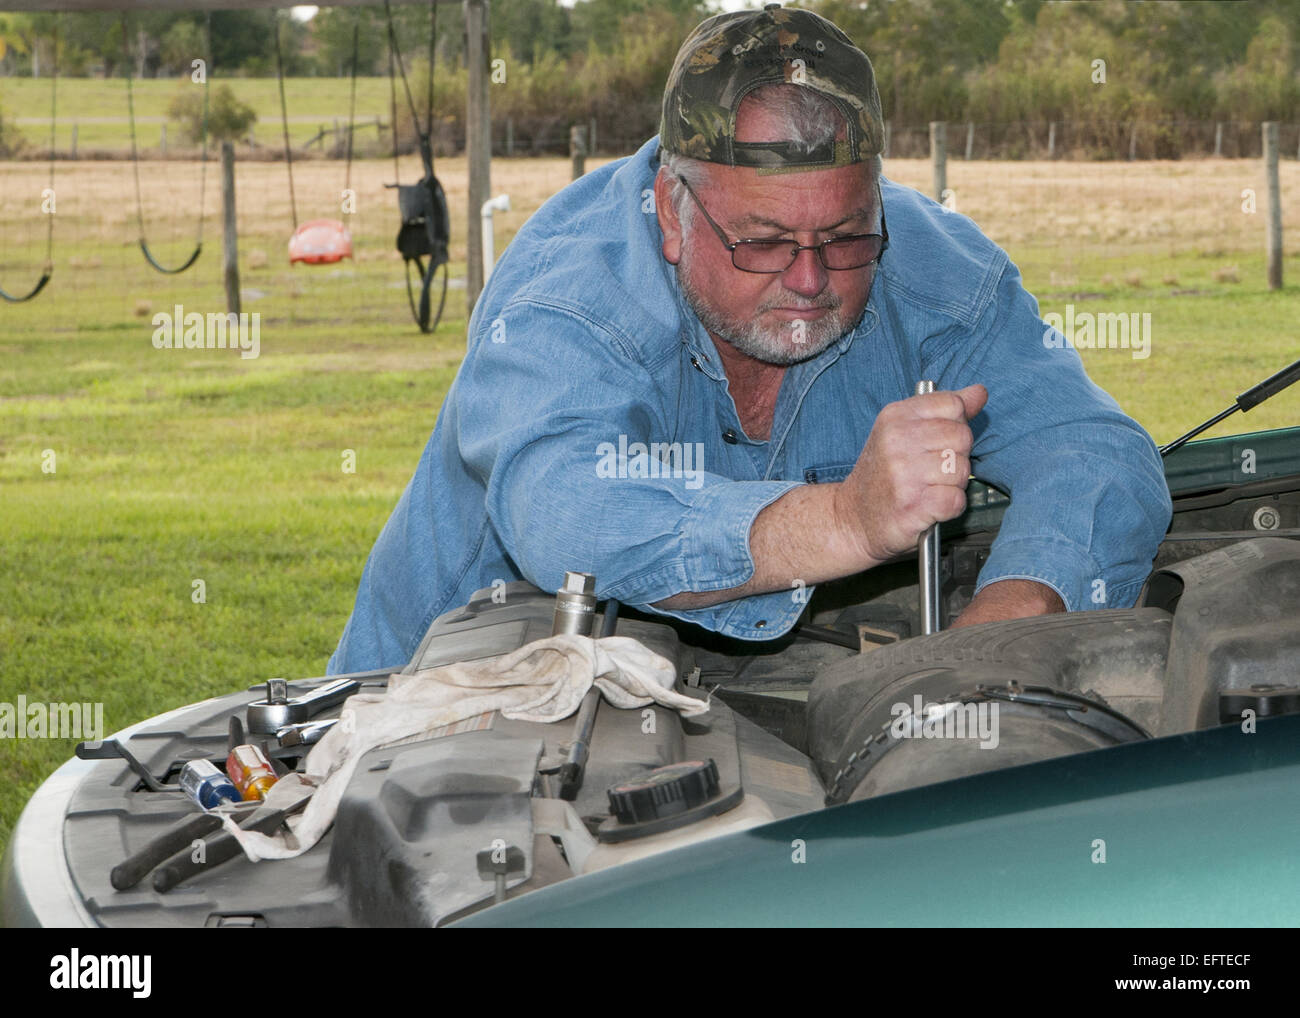 Man working on repairing his vehicle at home. Stock Photo